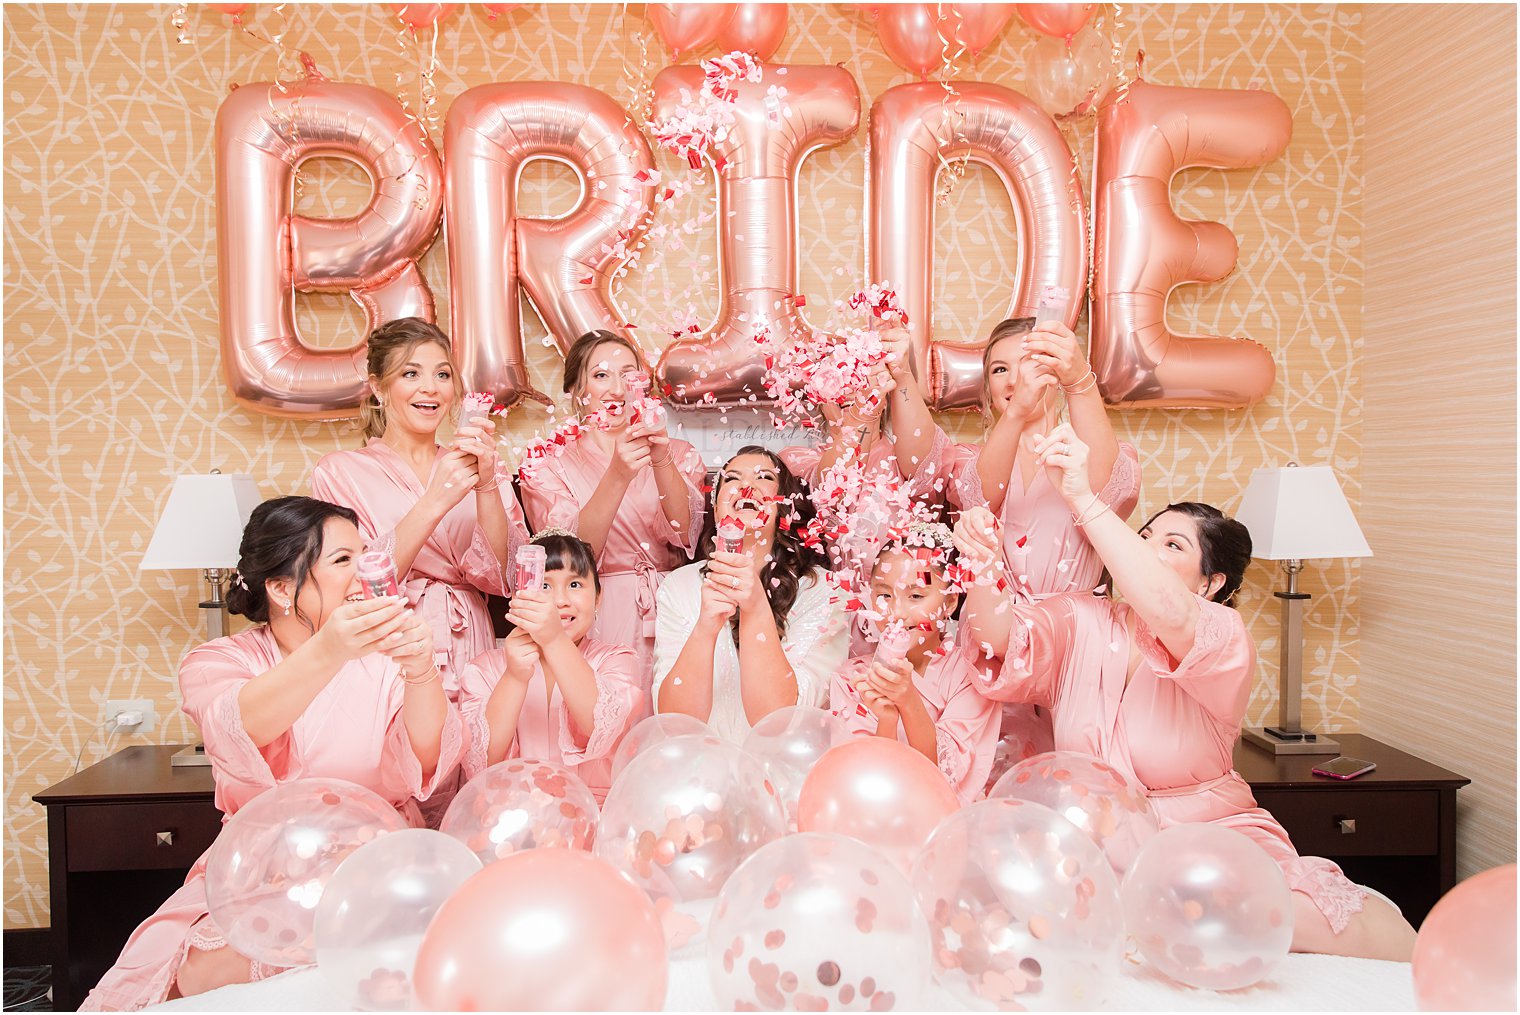 Balloons and confetti on your wedding morning: getting ready photo ideas for your wedding from NJ Wedding photographer Idalia Photography